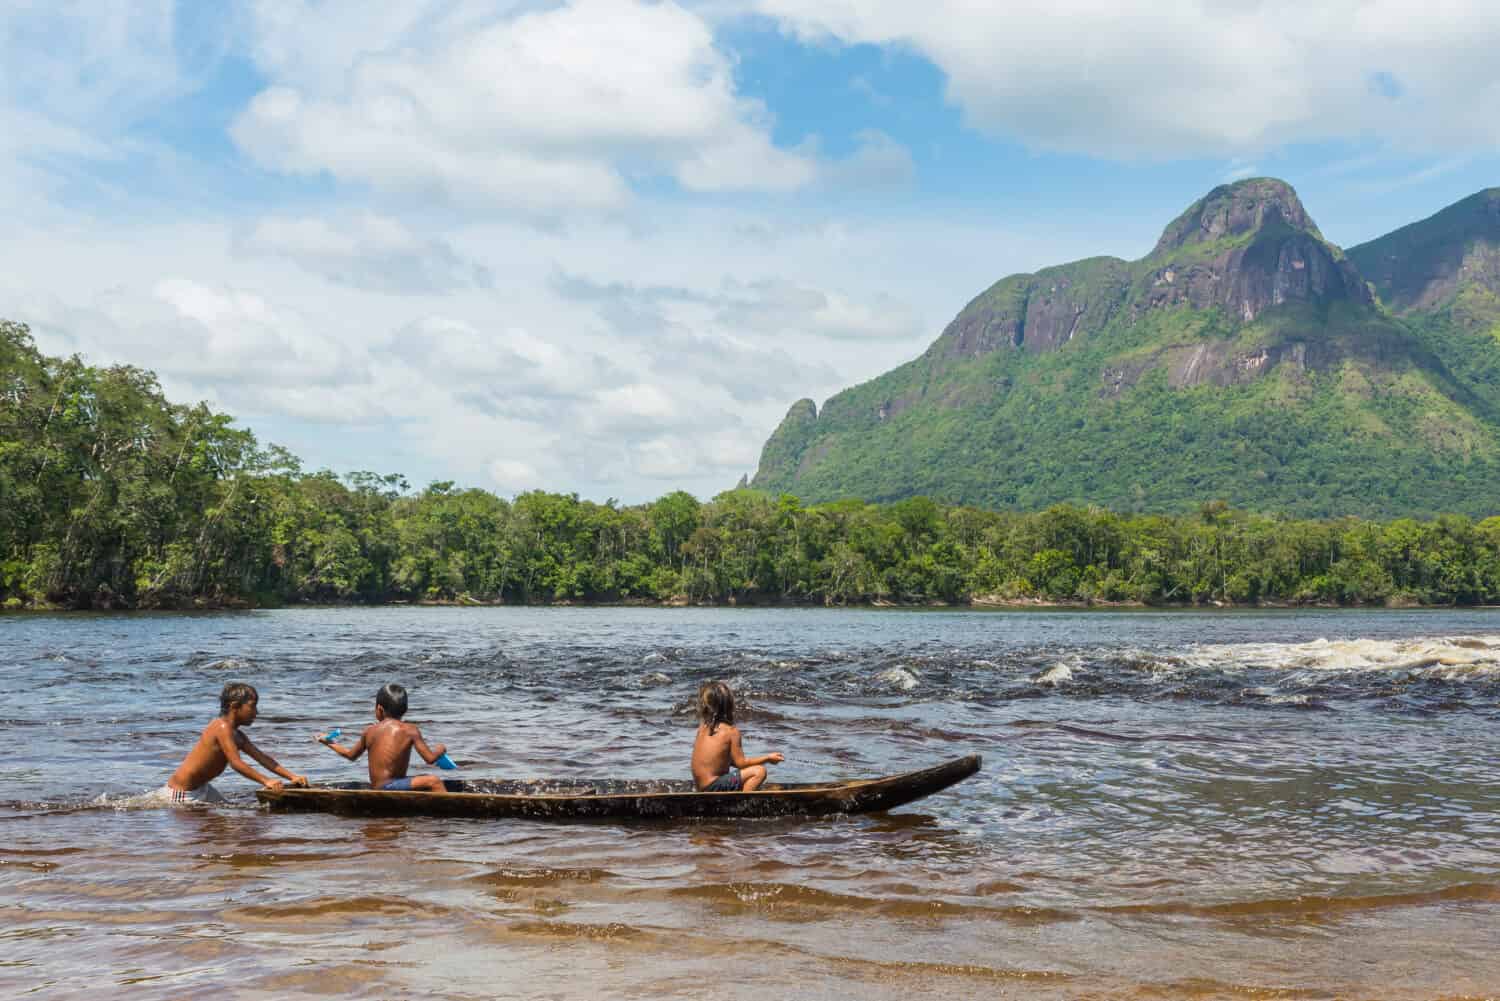 Children from the Piaroa ethnicity play on a canoe in the waters of the Autana river, in the amazonas state, in southern Venezuela